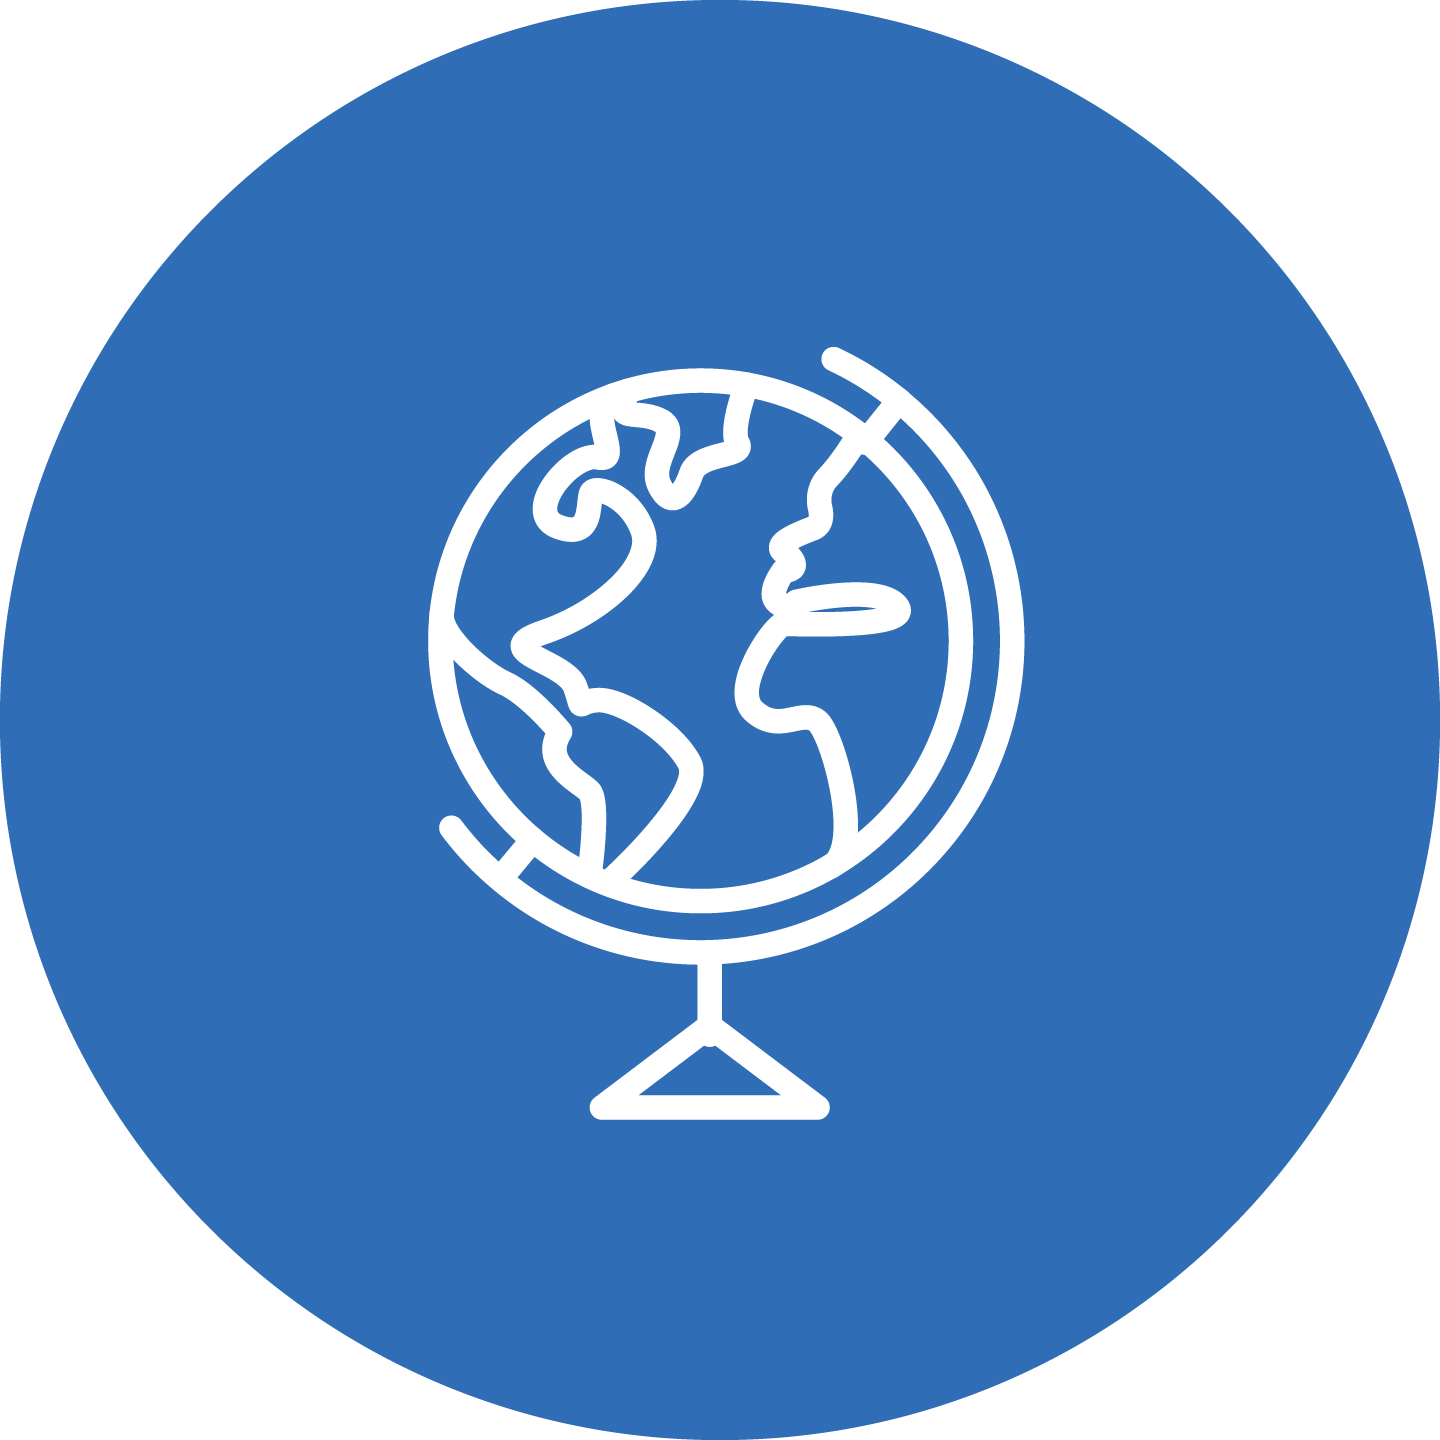 illustration of a globe in a blue filled circle